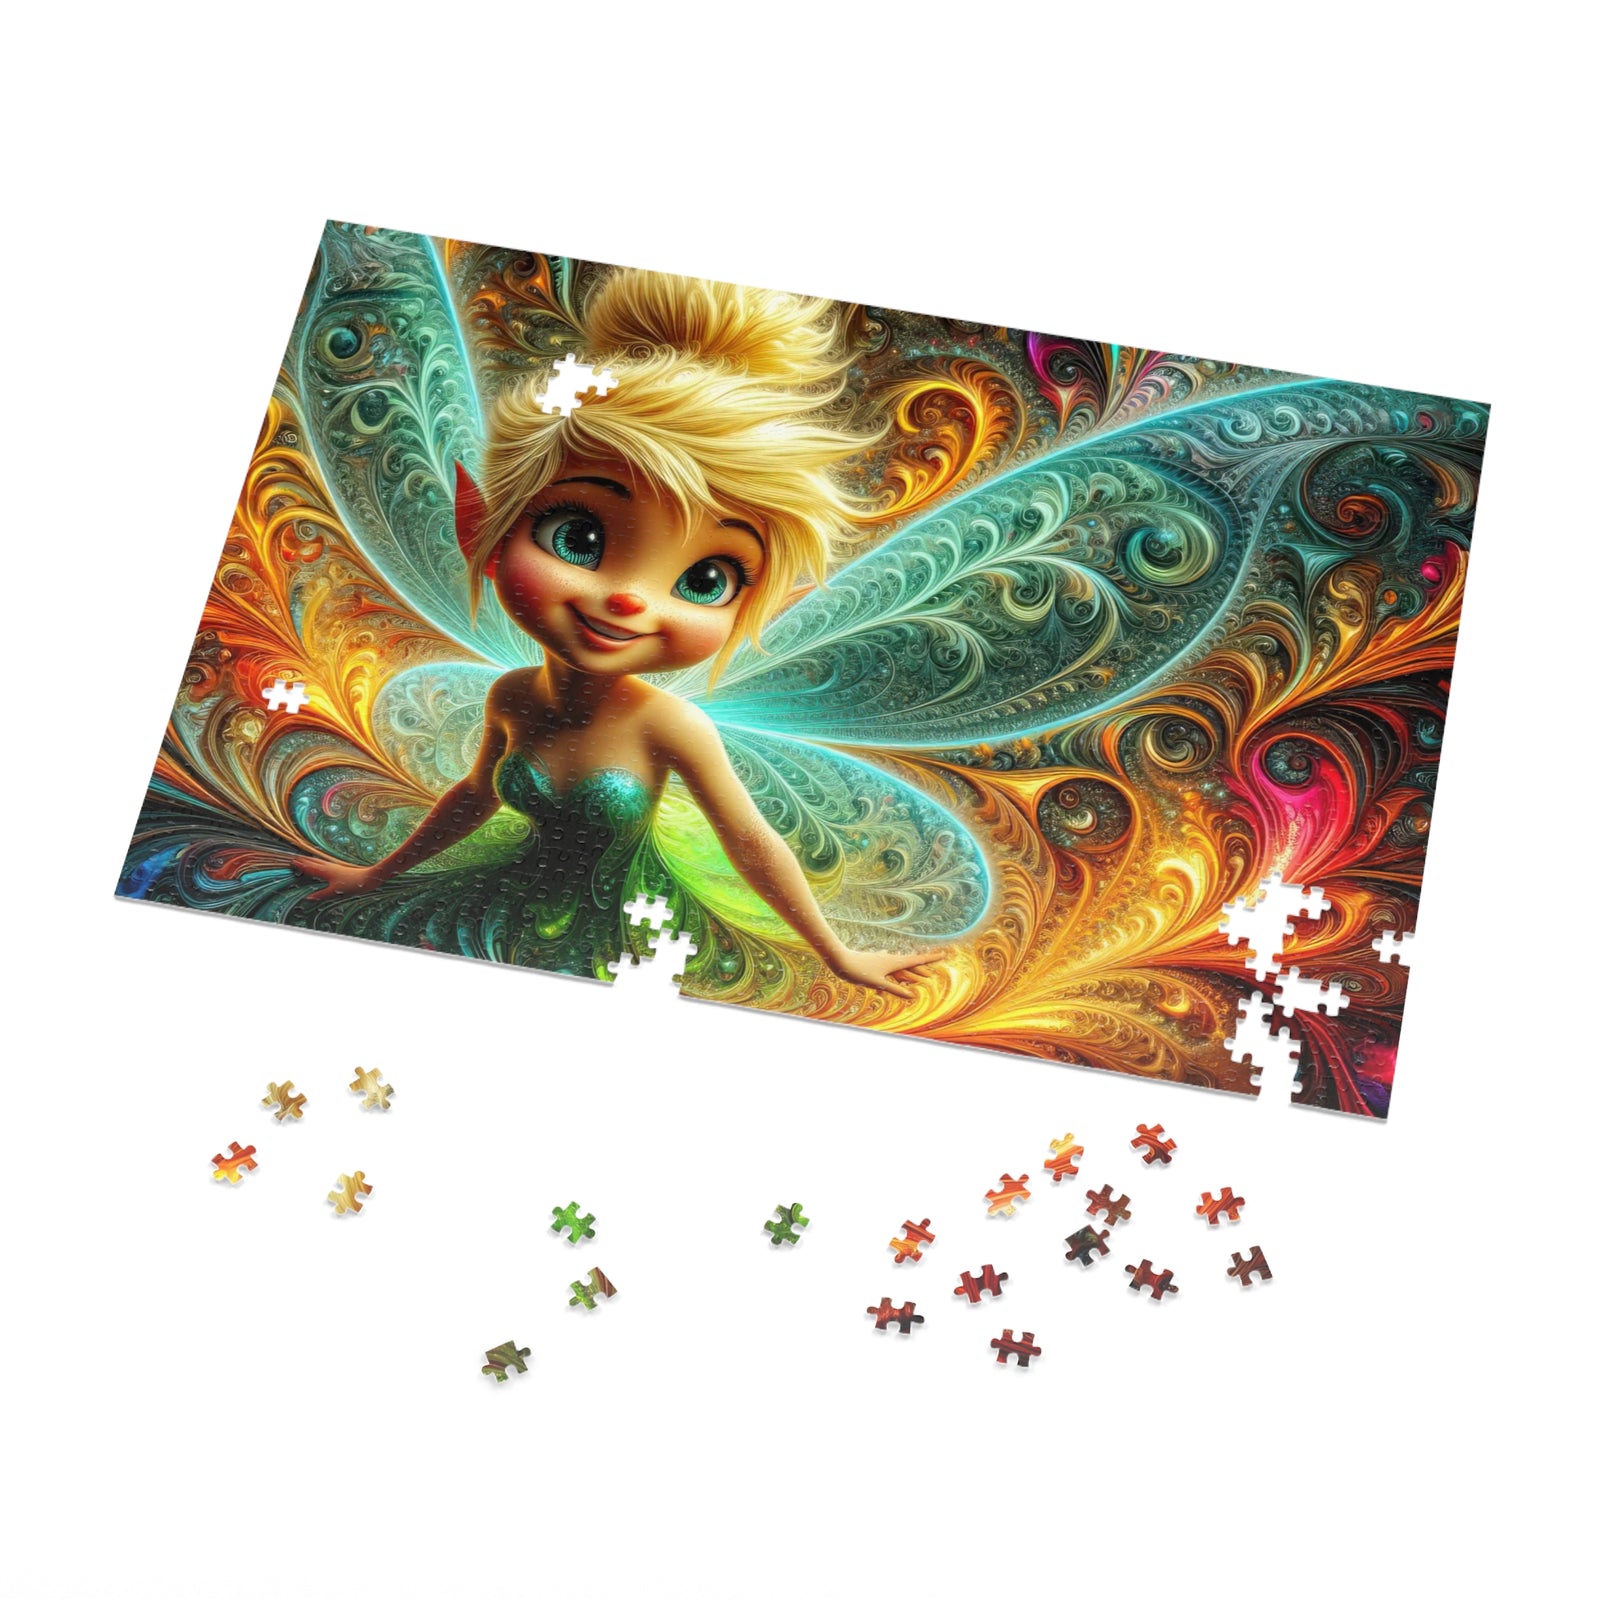 Ornate Overture of the Opulent Sprite Jigsaw Puzzle